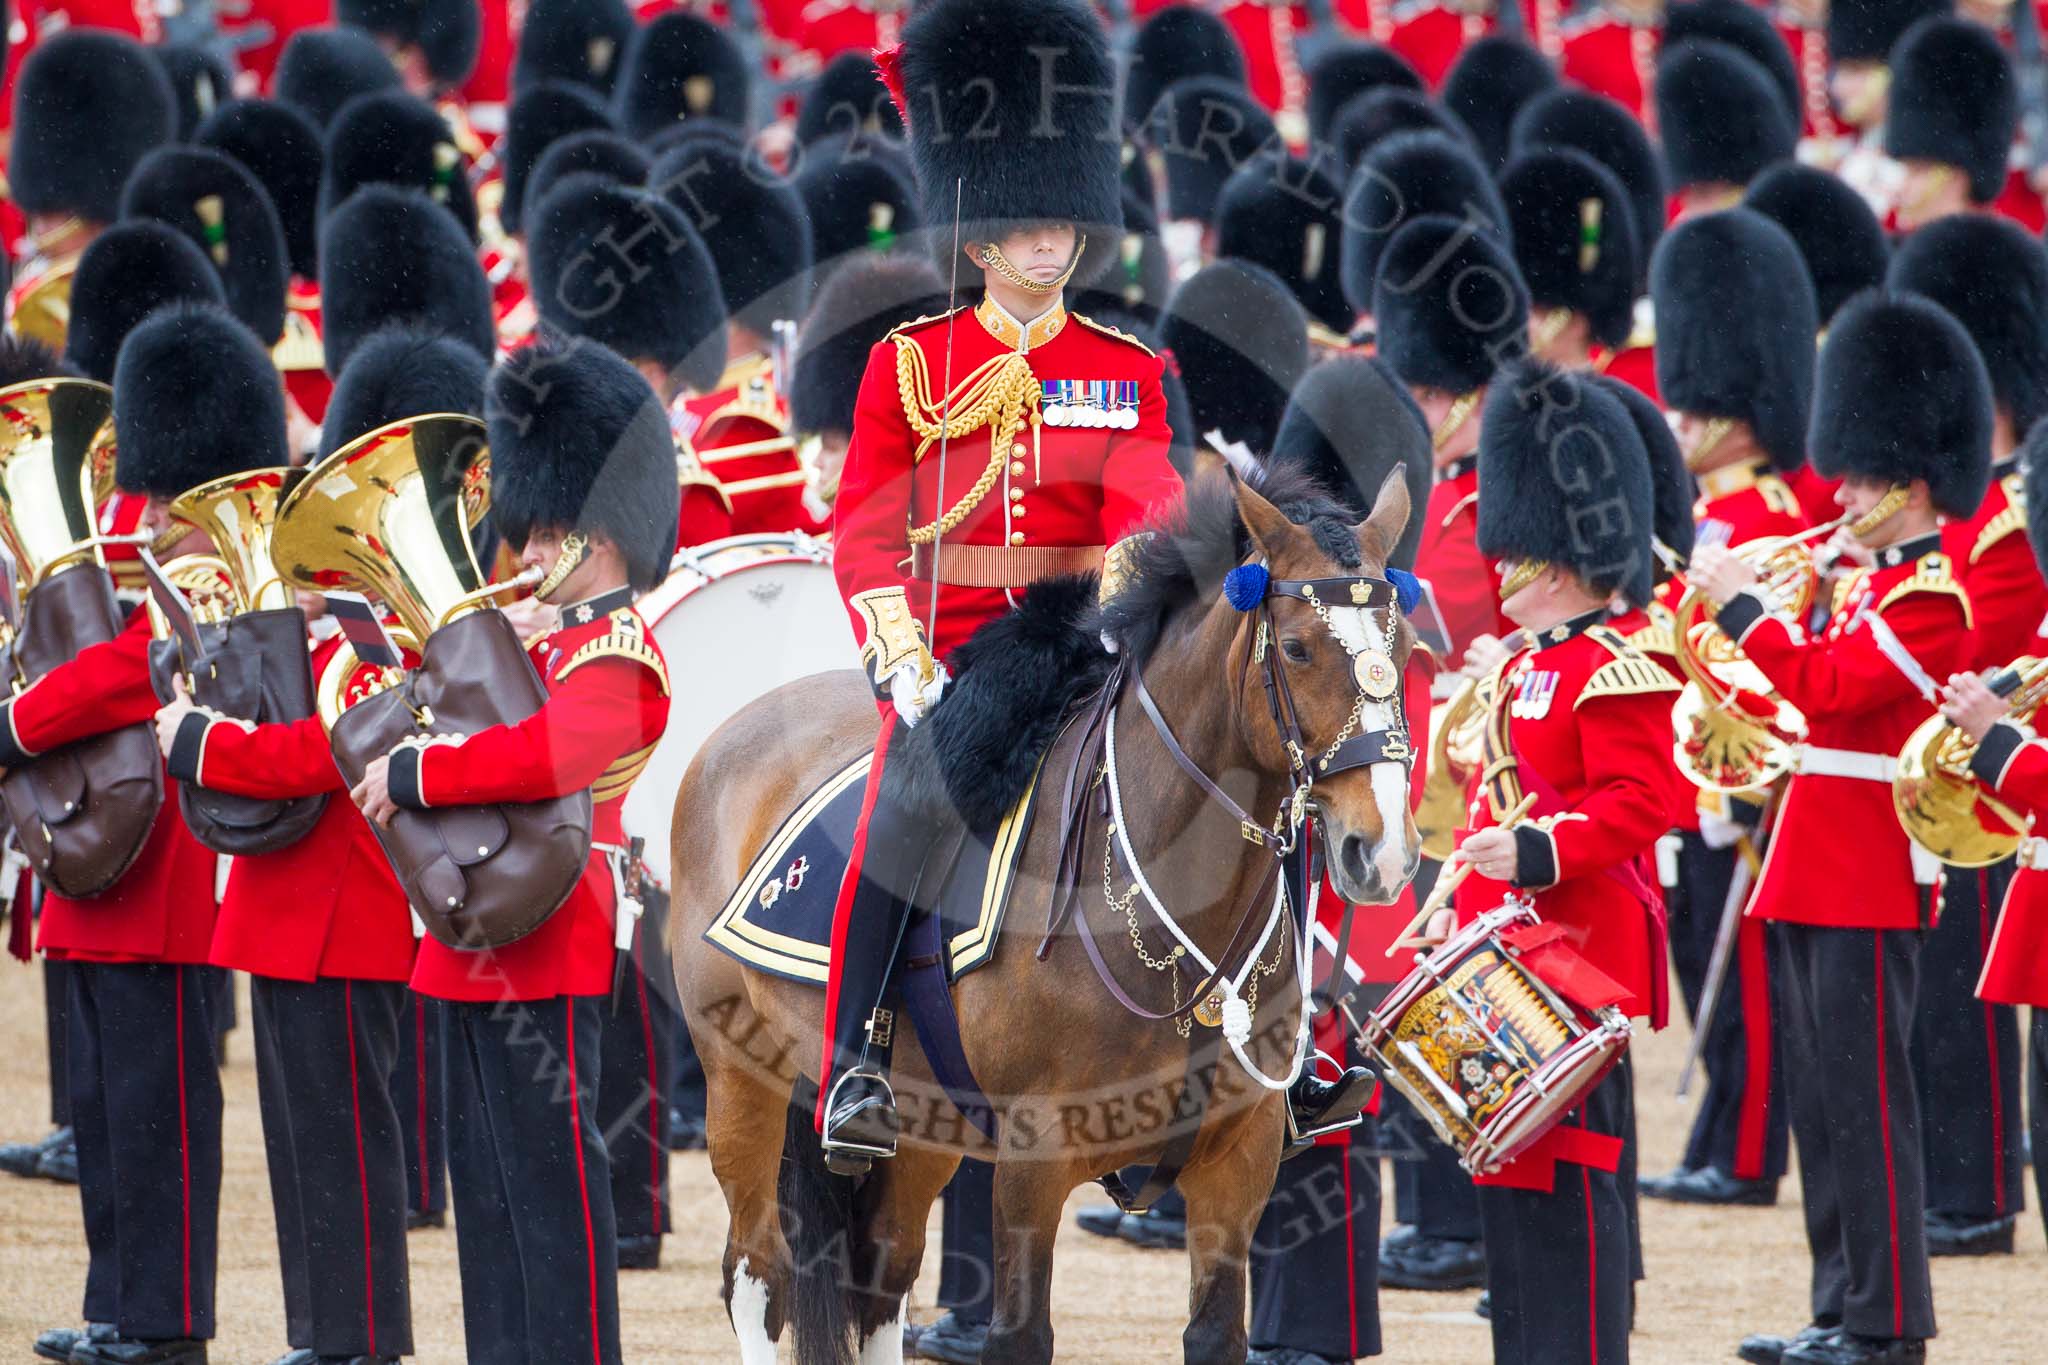 Trooping the Colour 2012: The Field Officer in Brigade Waiting, Lieutenant Colonel R C N Sergeant, Coldstream Guards, about to order "Present Arms" whilst the Massed Bands are playing the National Anthem..
Horse Guards Parade, Westminster,
London SW1,

United Kingdom,
on 16 June 2012 at 11:25, image #336